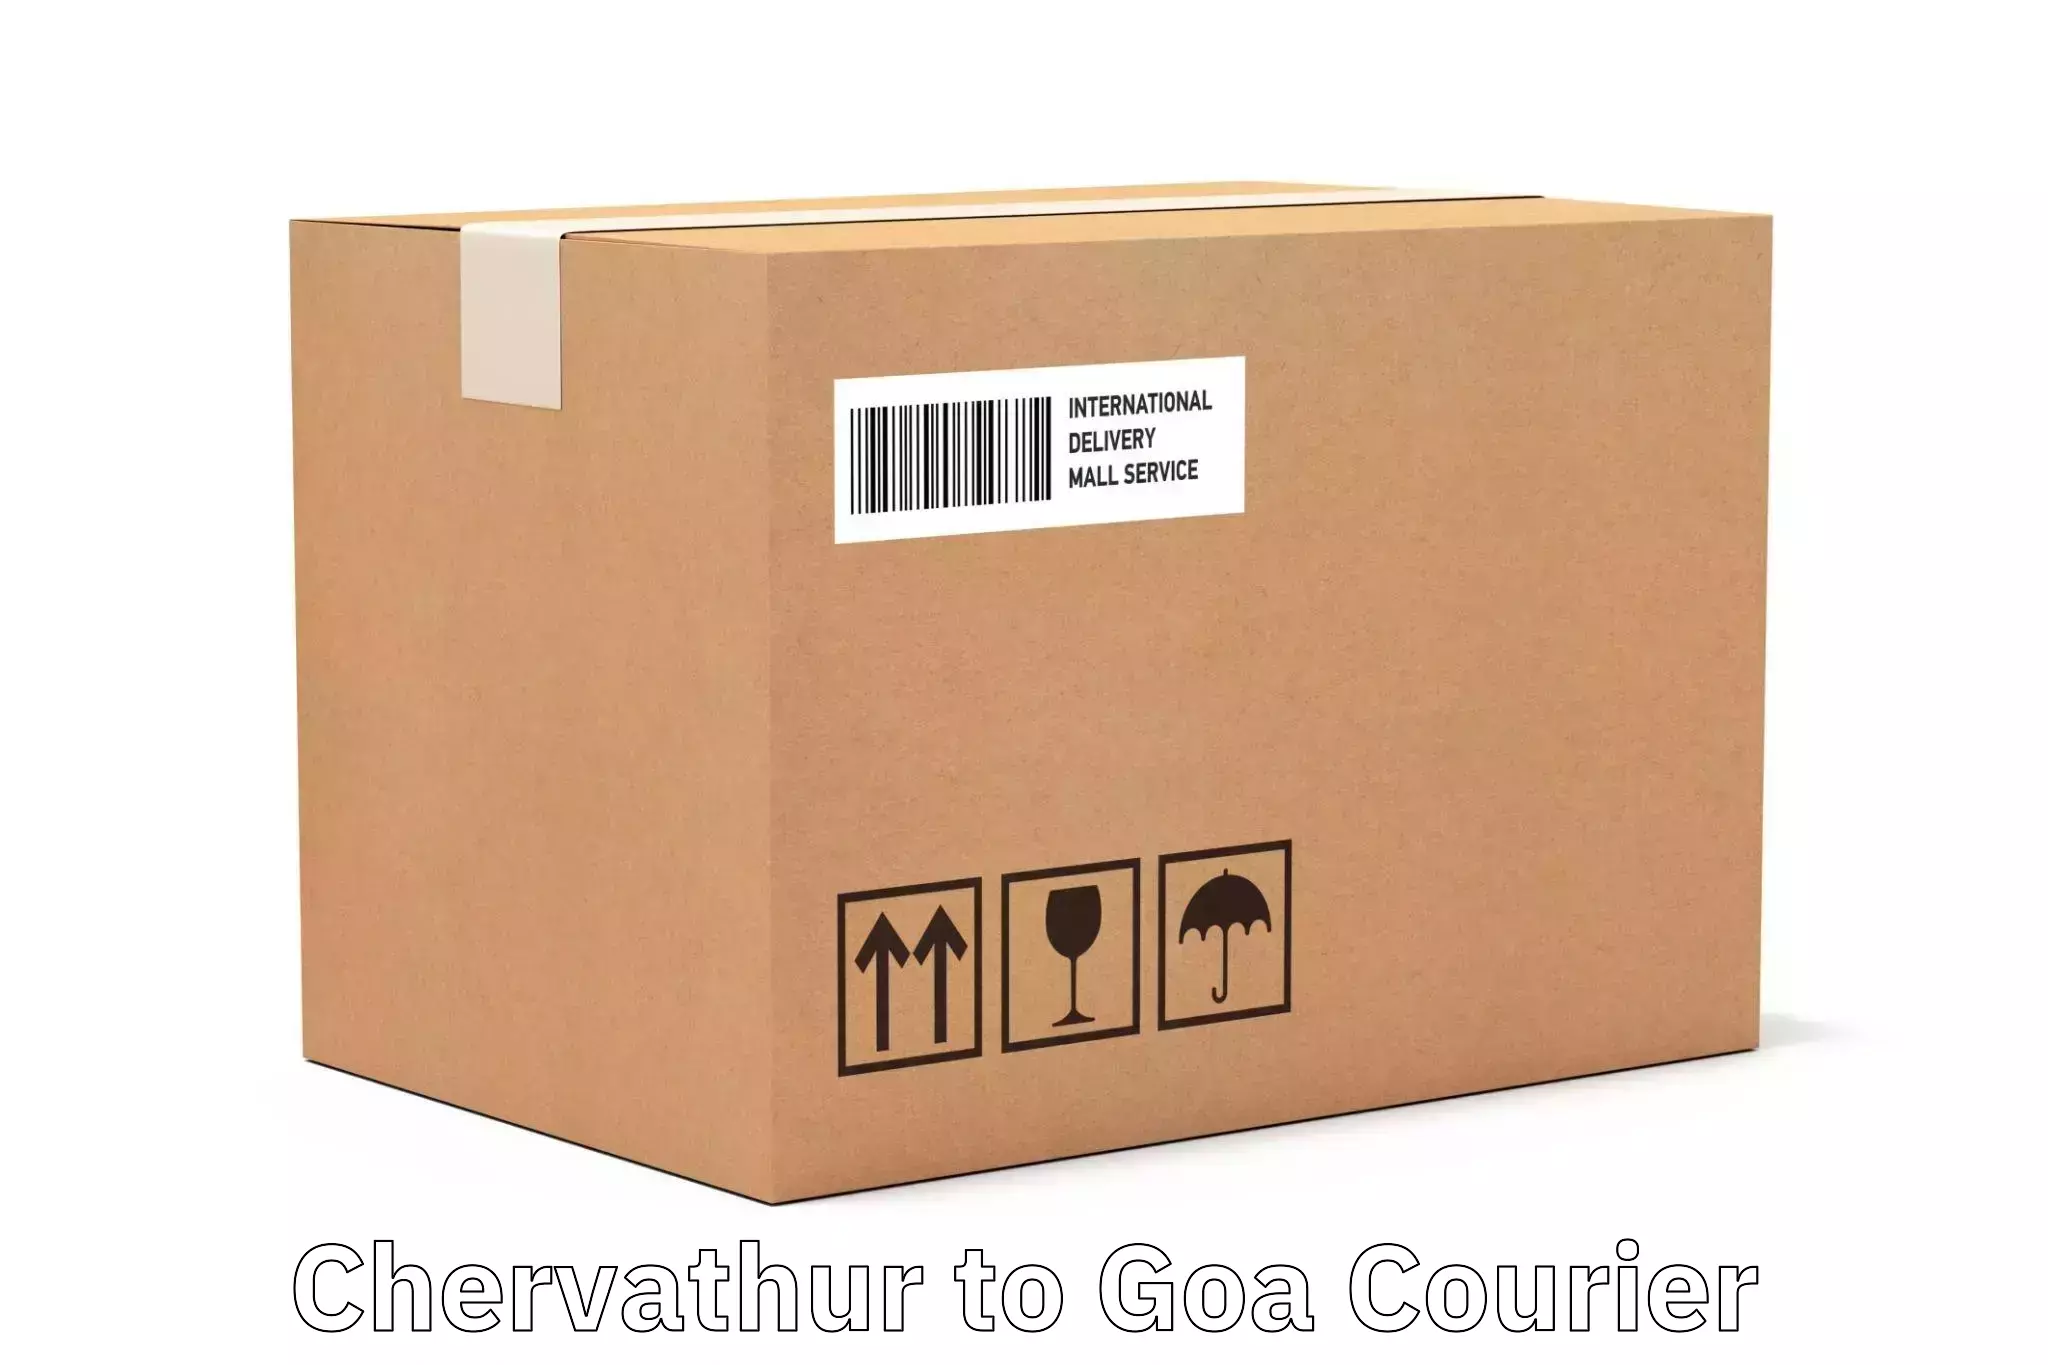 Postal and courier services Chervathur to Panaji